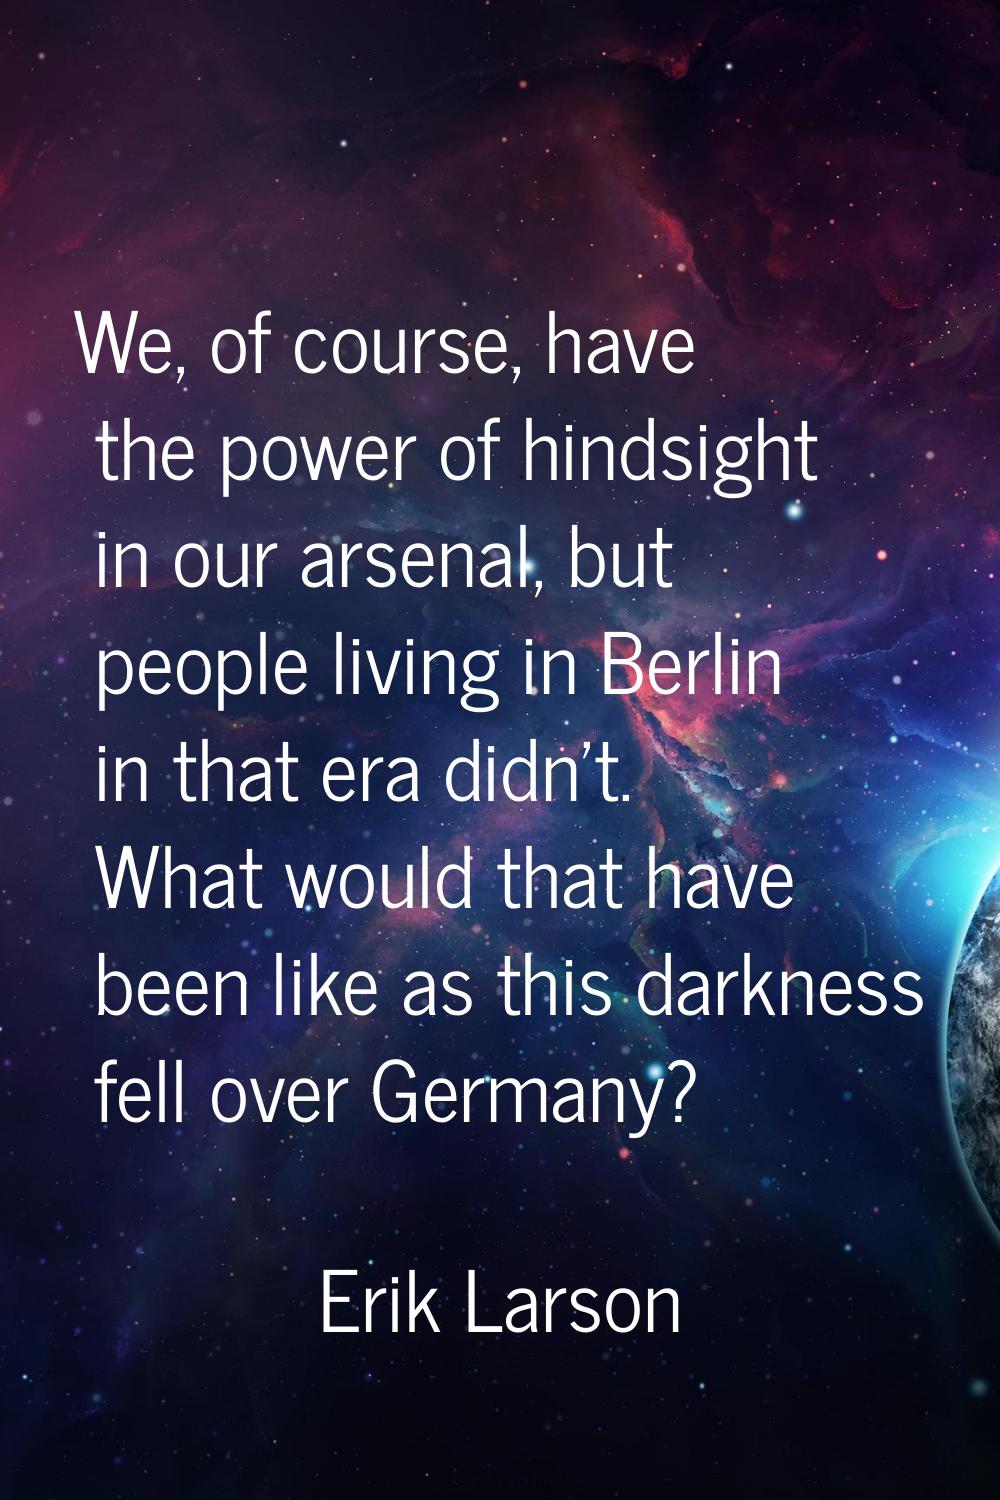 We, of course, have the power of hindsight in our arsenal, but people living in Berlin in that era 